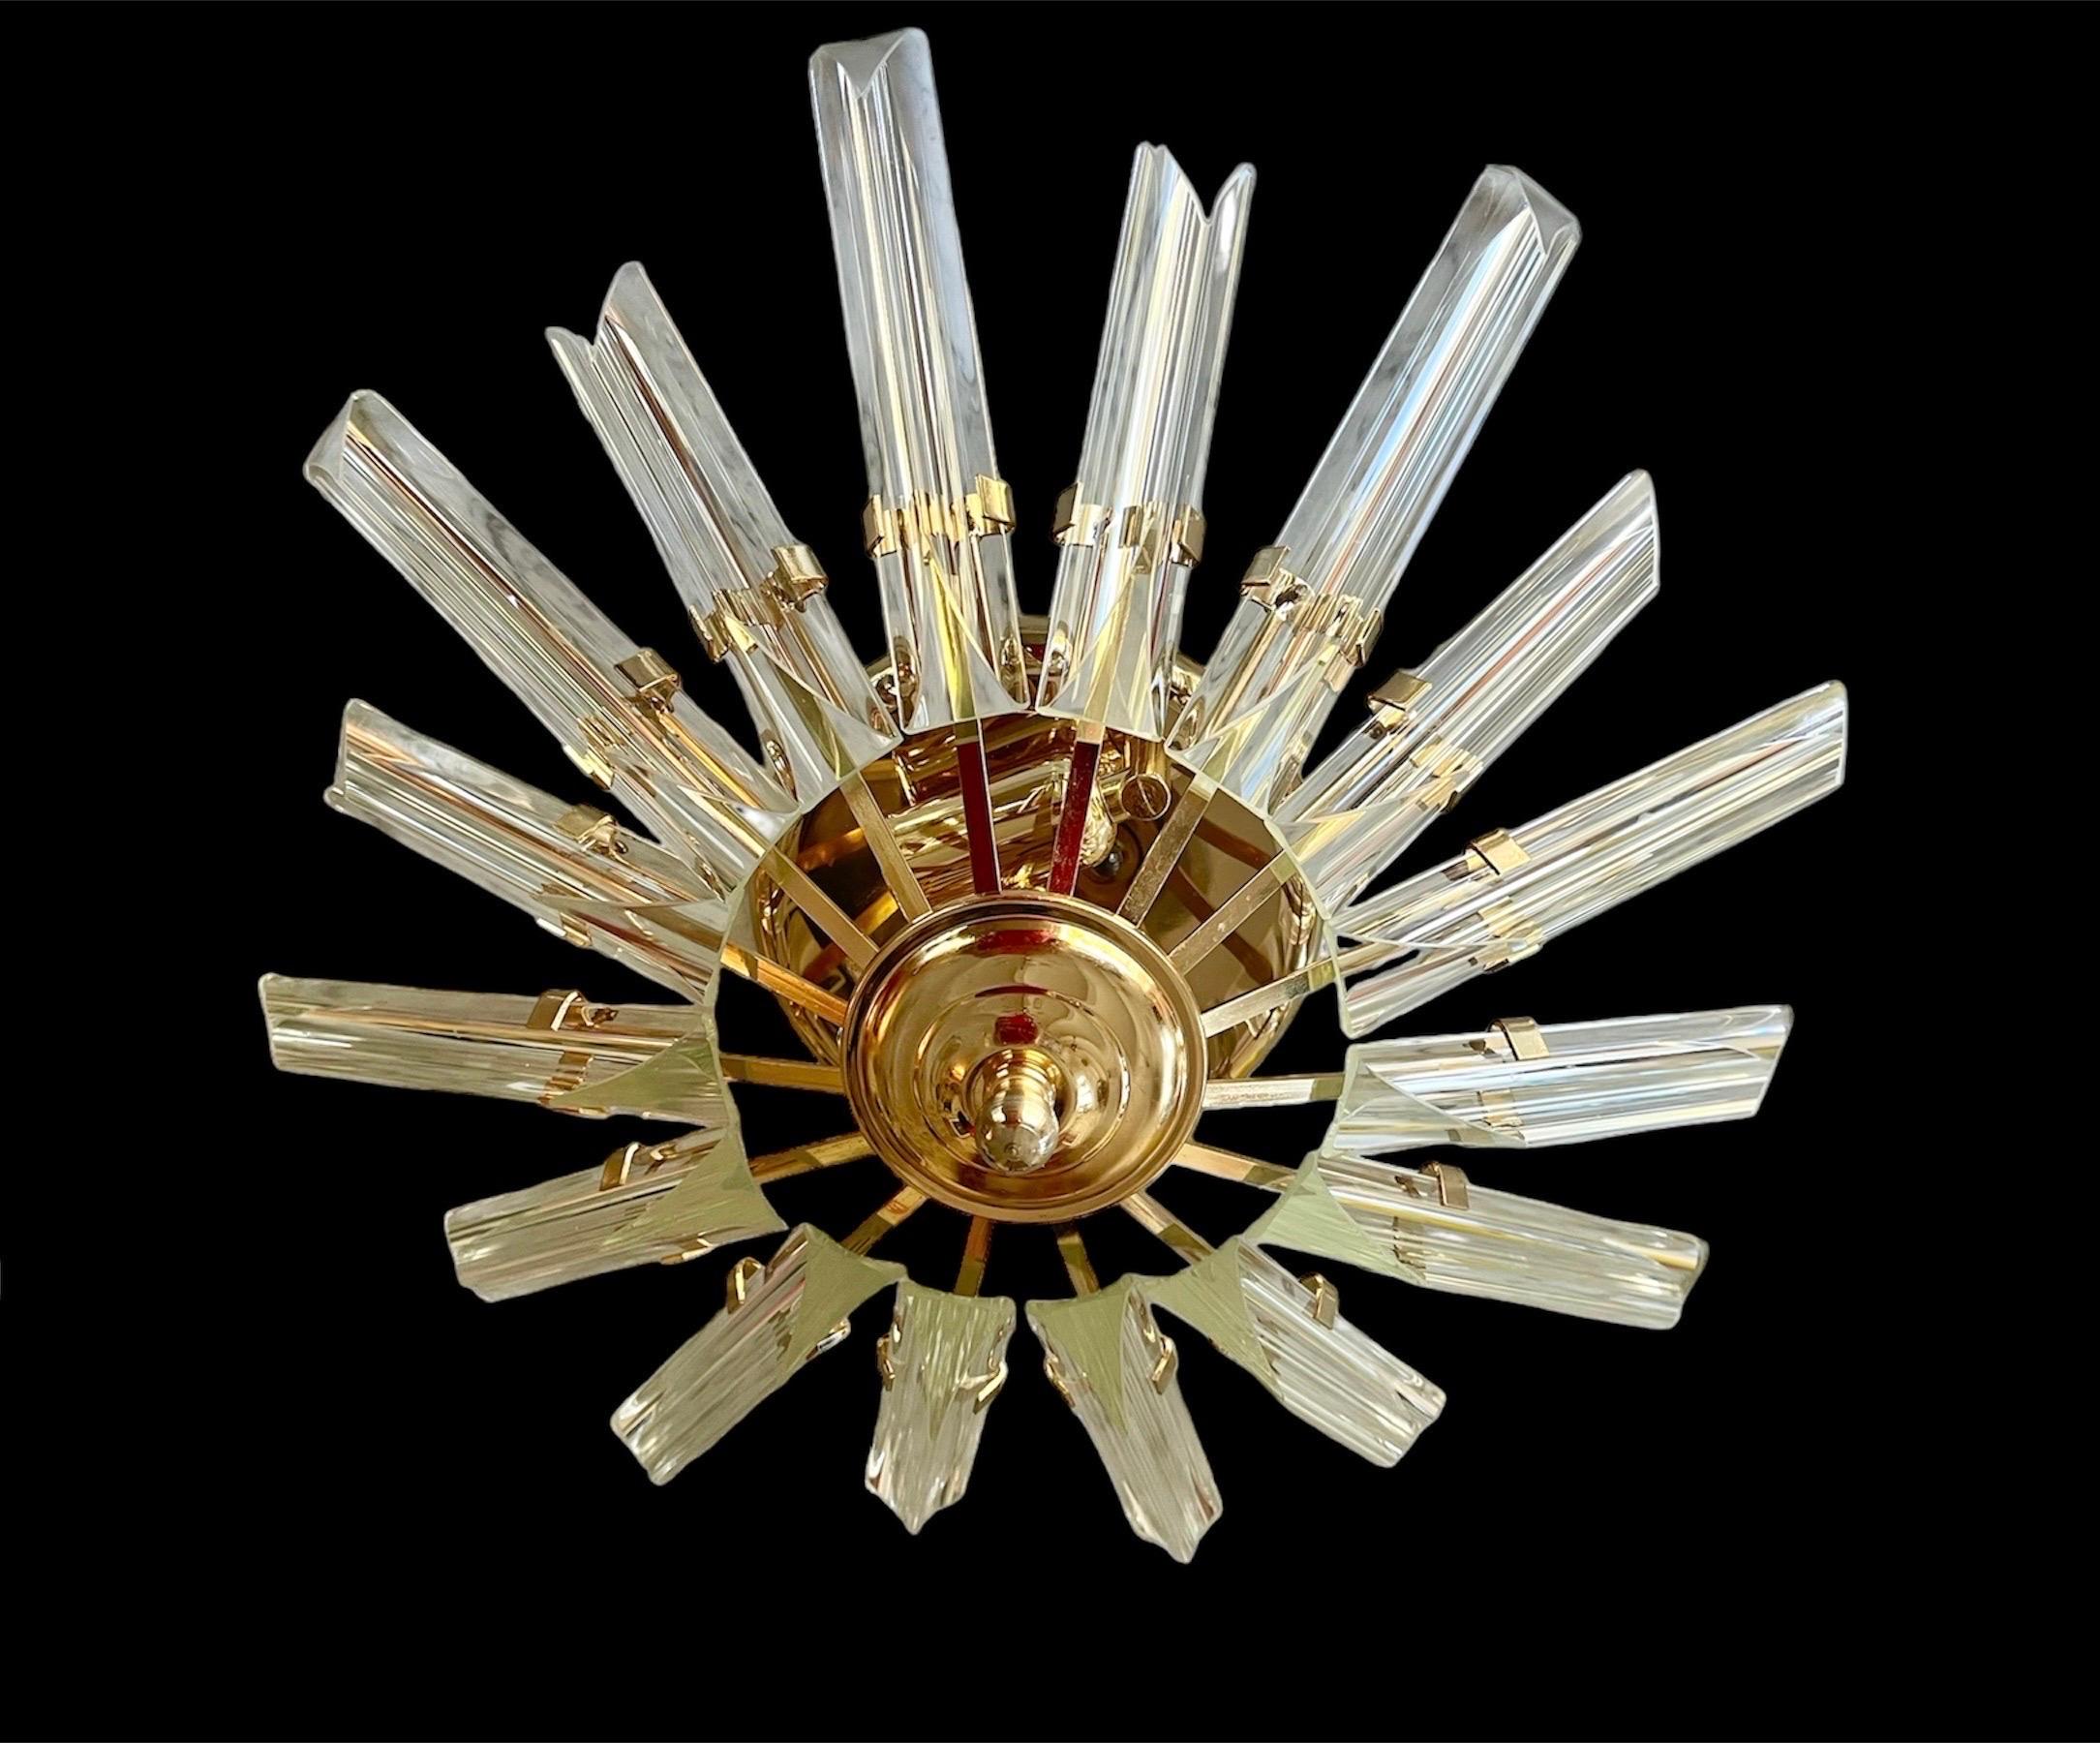 Venini design ceiling lighting murano glass with in iridium glass. The design and the quality of the glass make this piece the best of the design.
This wall lighting pair are in good condition.

Venini is an Italian company that is known for its